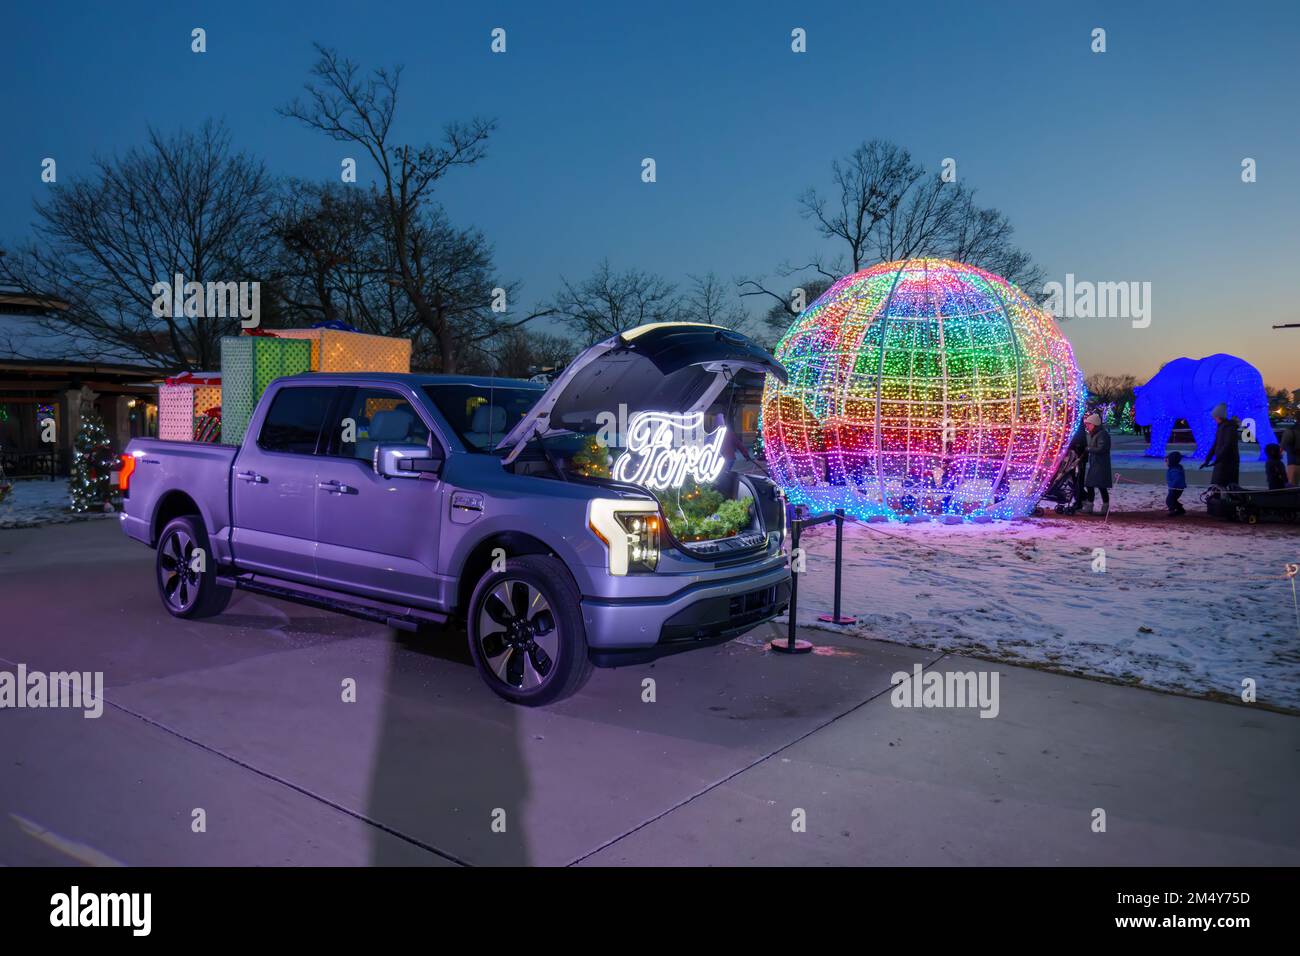 Fored F150 Lightning electric pickup truck on display. The truck is powering the lights of the big globe. Stock Photo